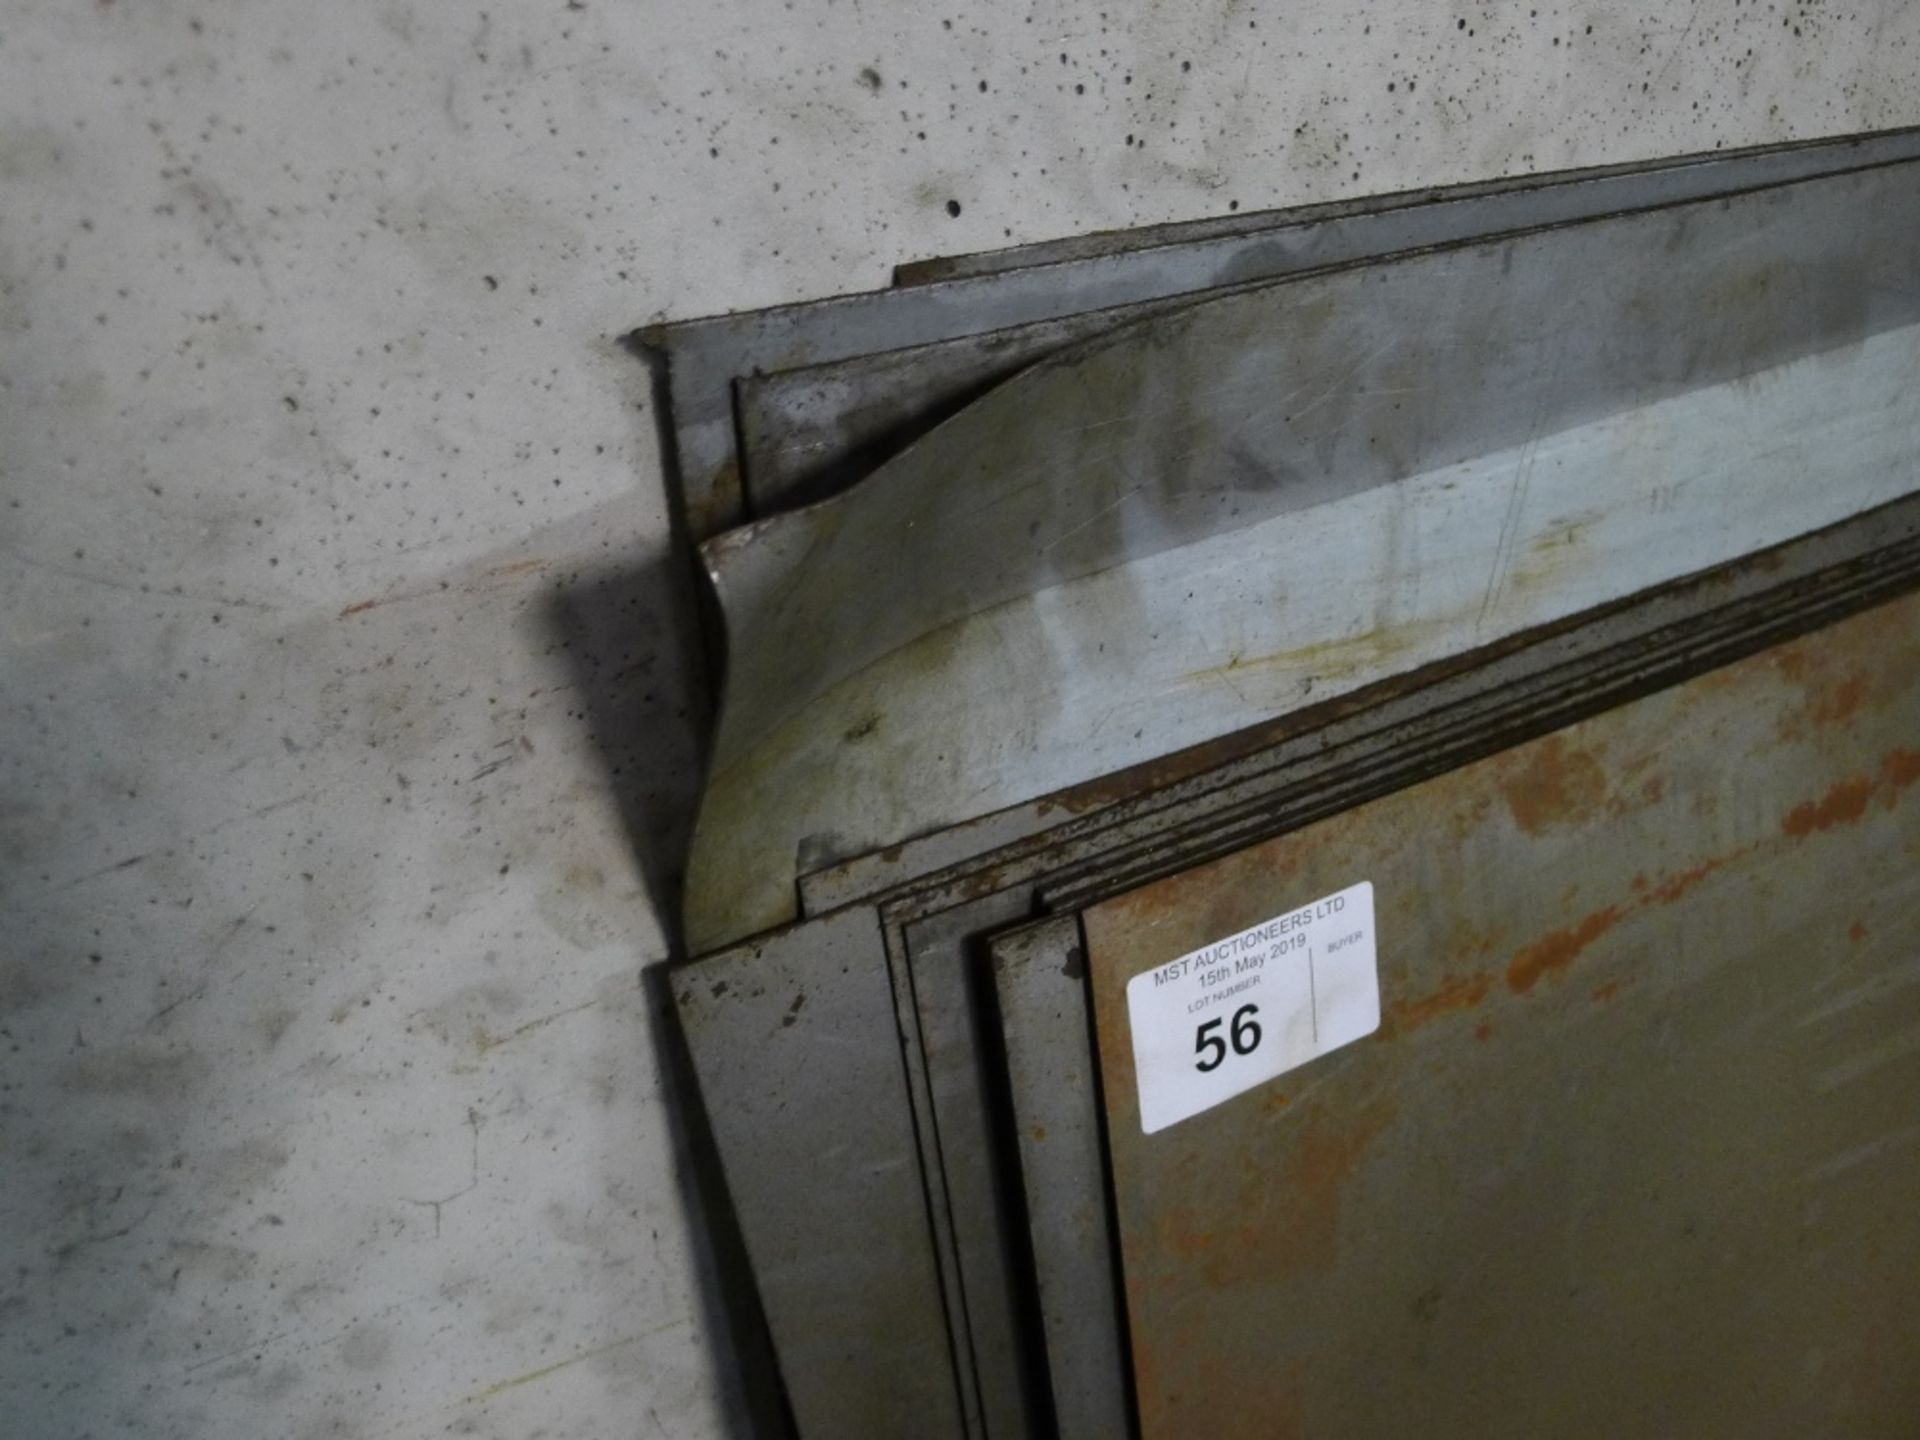 A quantity of mild steel sheets suitable for welding repairs etc - Image 2 of 2